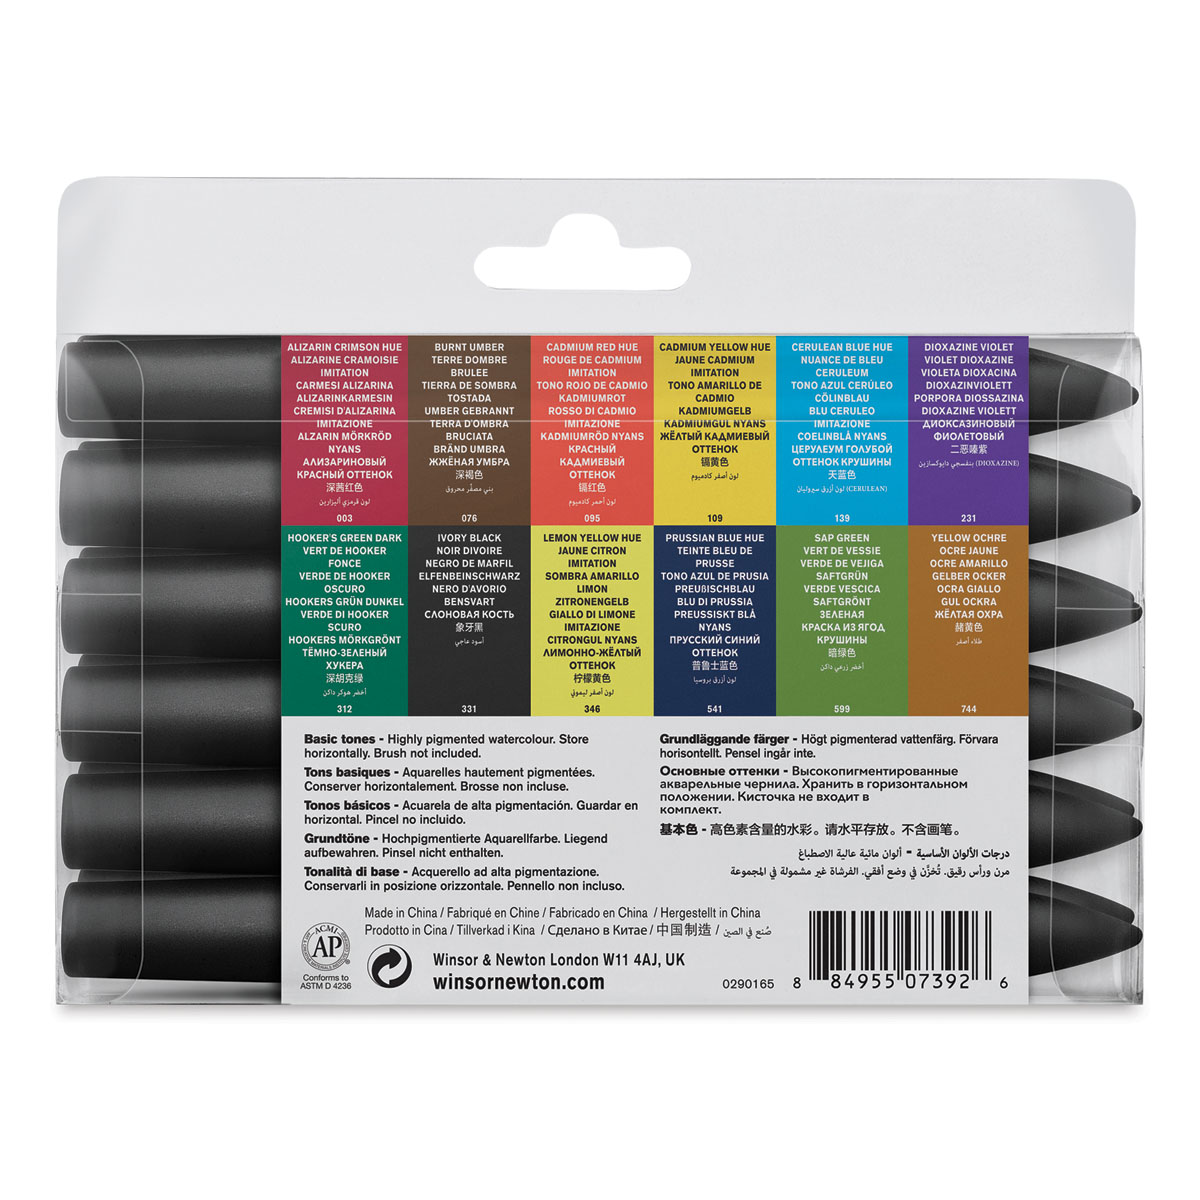 Winsor & Newton Promarker Watercolor Markers - Basic Colors, Set of 12